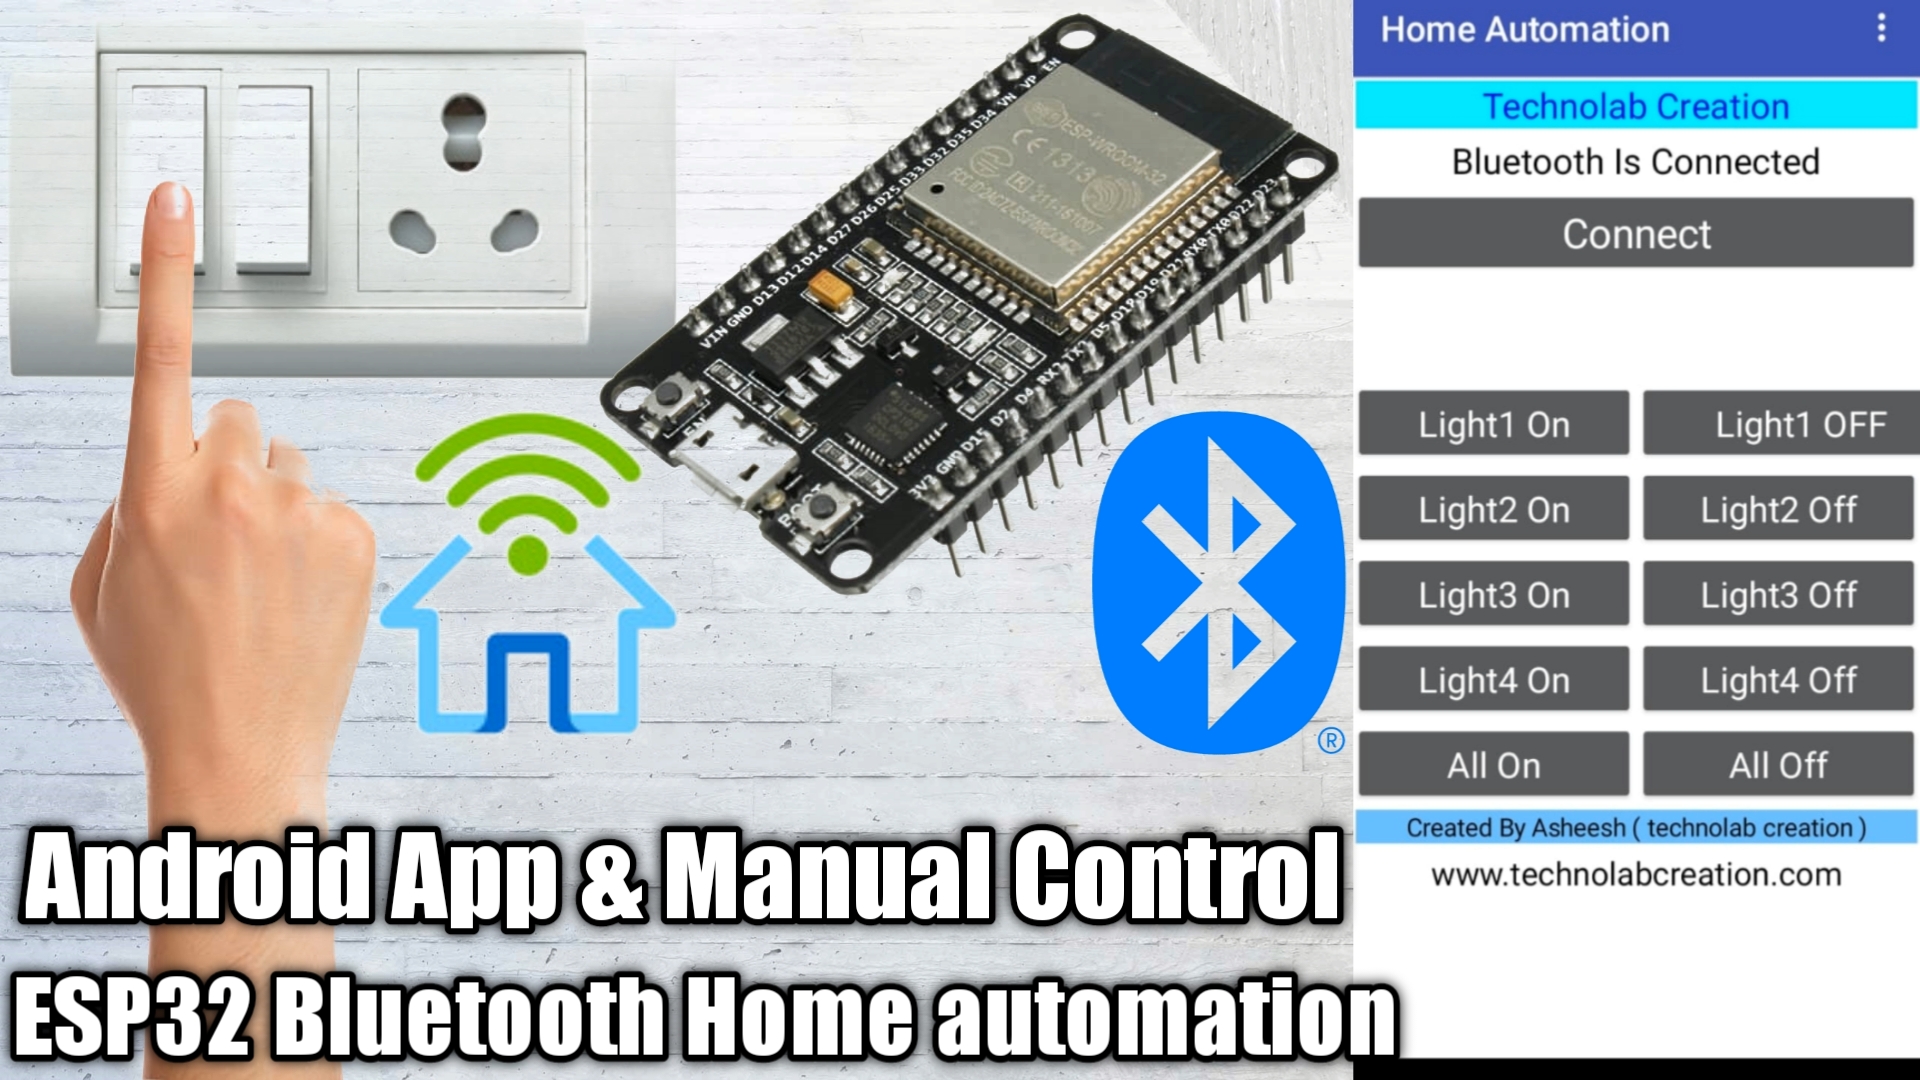 ESP32 Bluetooth HomeAutomation  Using Android App and Manual Switches.